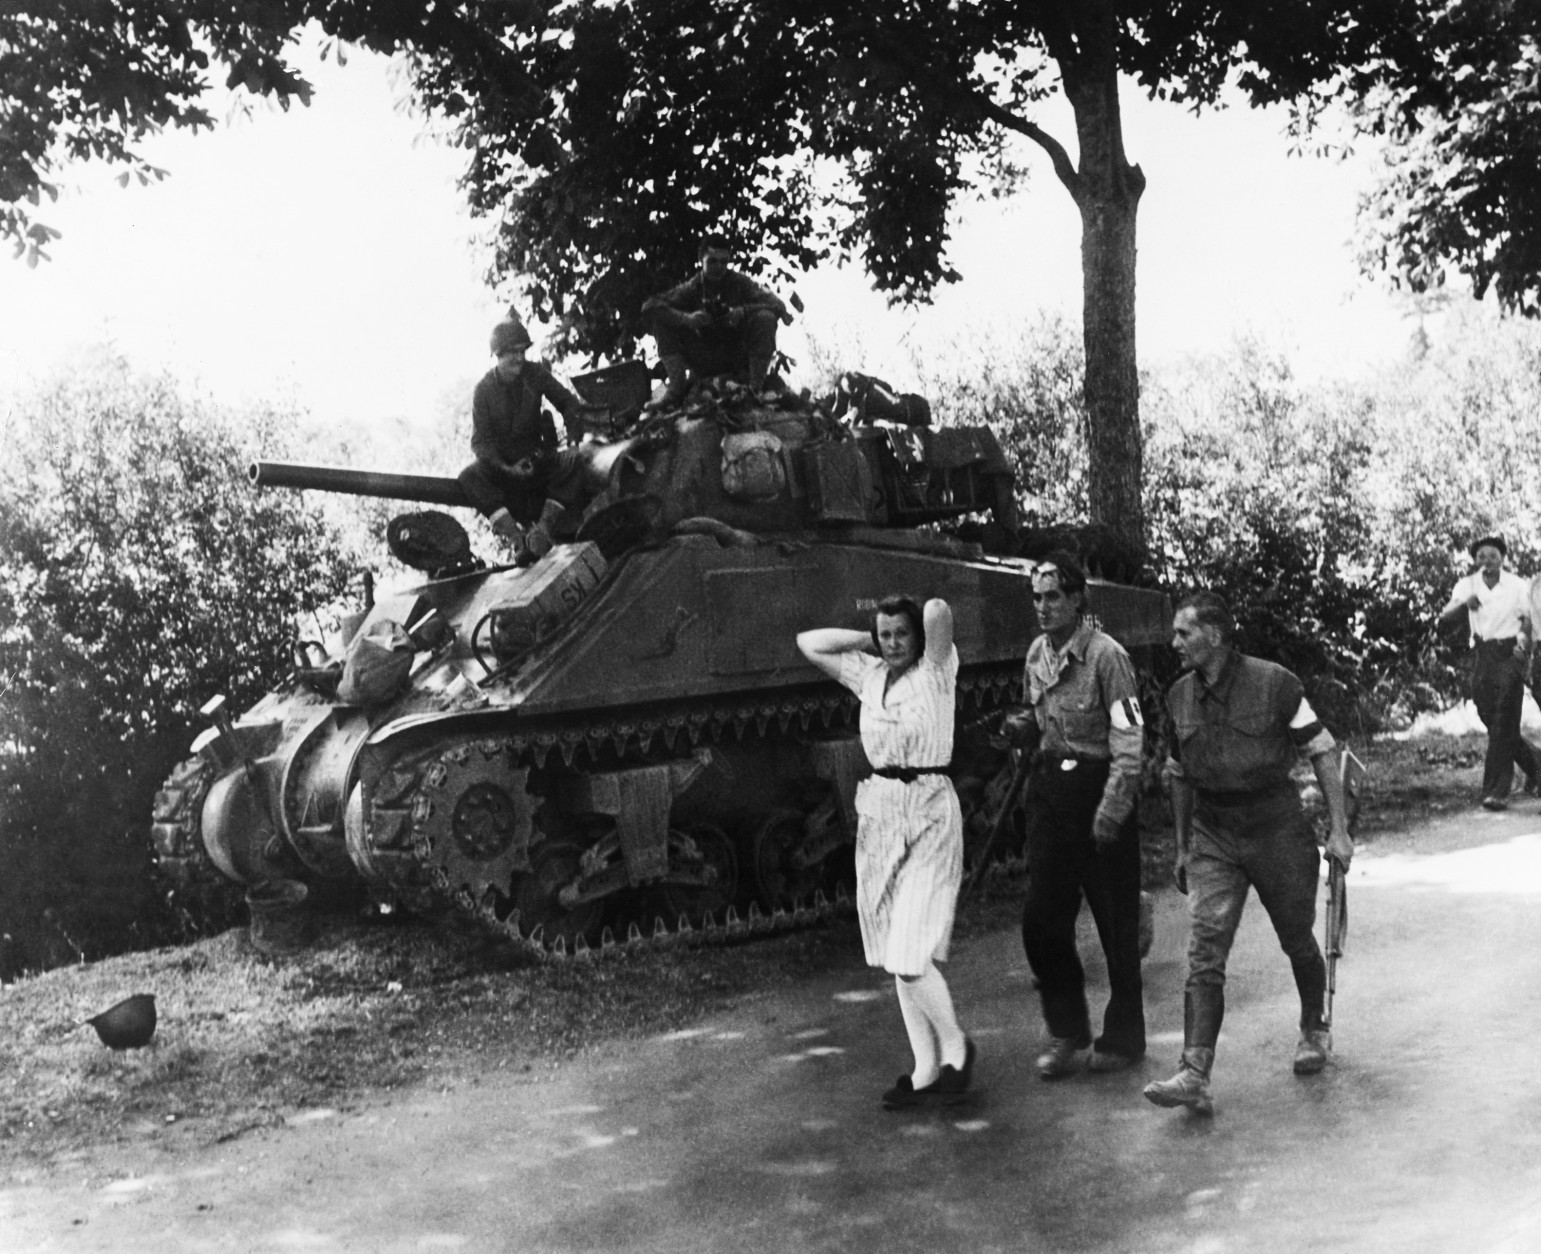 A French woman, accused of being a German sympathizer, is marched along a road past an American heavy tank followed by two armed French partisans on August 19, 1944. She is being taken to Pre en Pail, France, there to be shorn of her hair. (AP Photo)